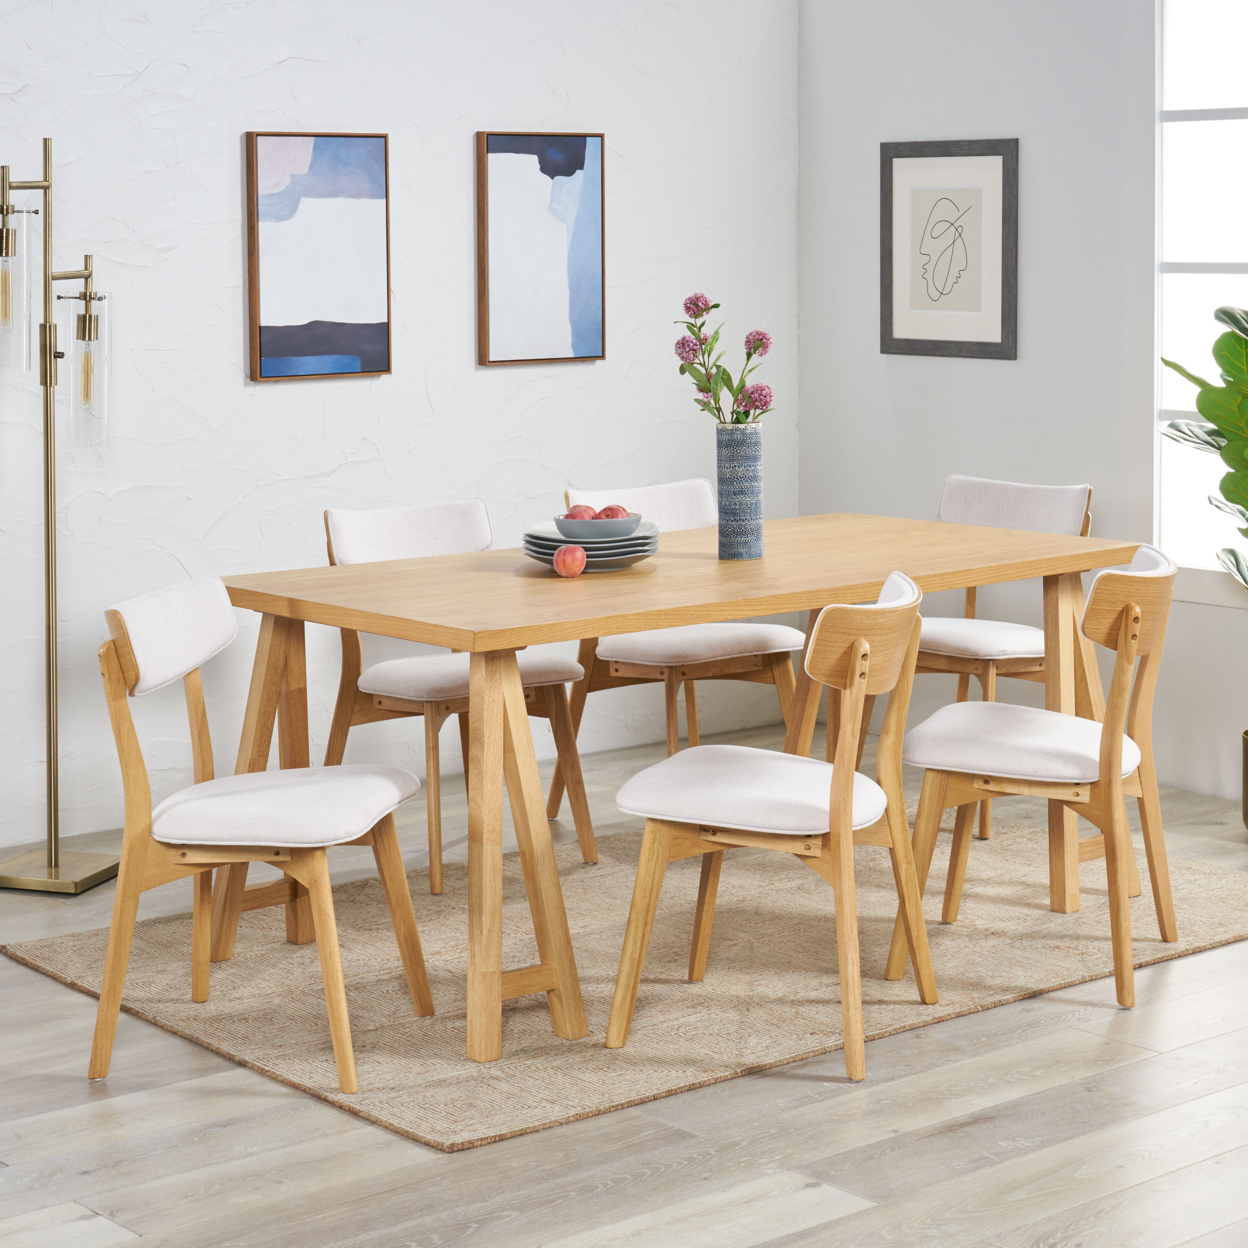 Turat Mid-Century Modern 7 Piece Dining Set With A-Frame Table - Natural Oak/light Beige